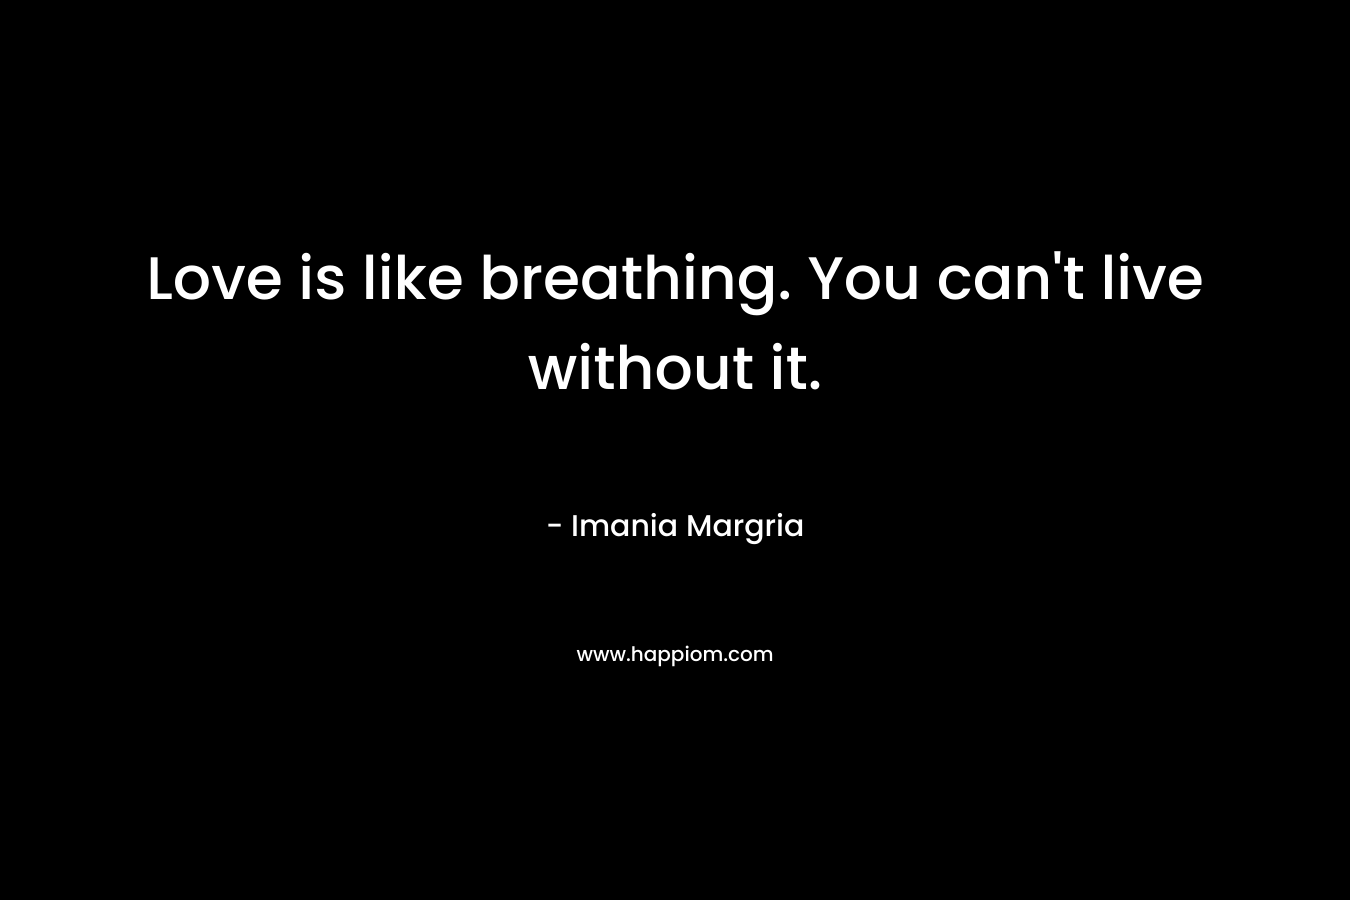 Love is like breathing. You can't live without it.